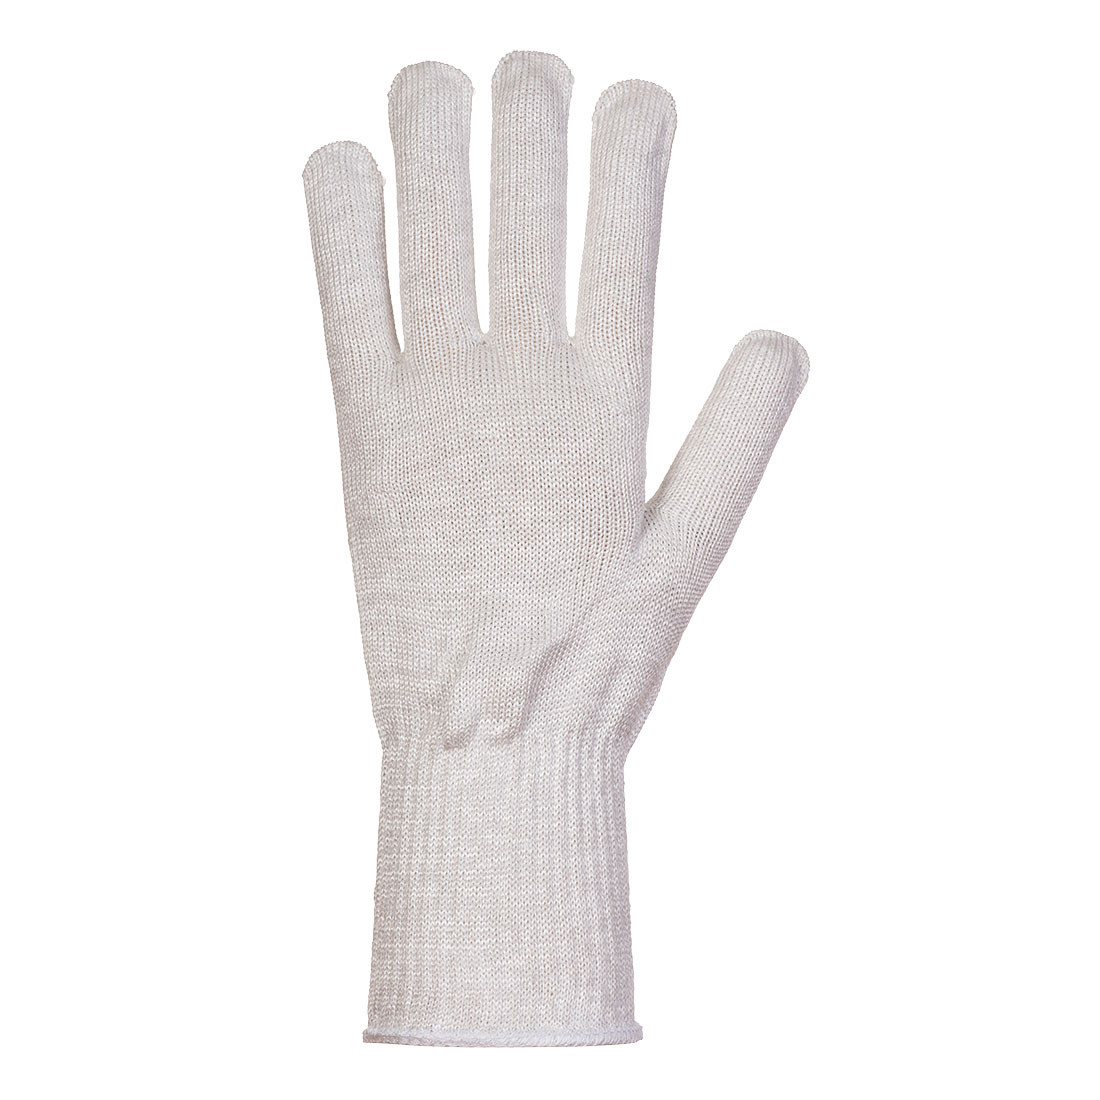 AHR 10 Food Glove Liner - Personal protection